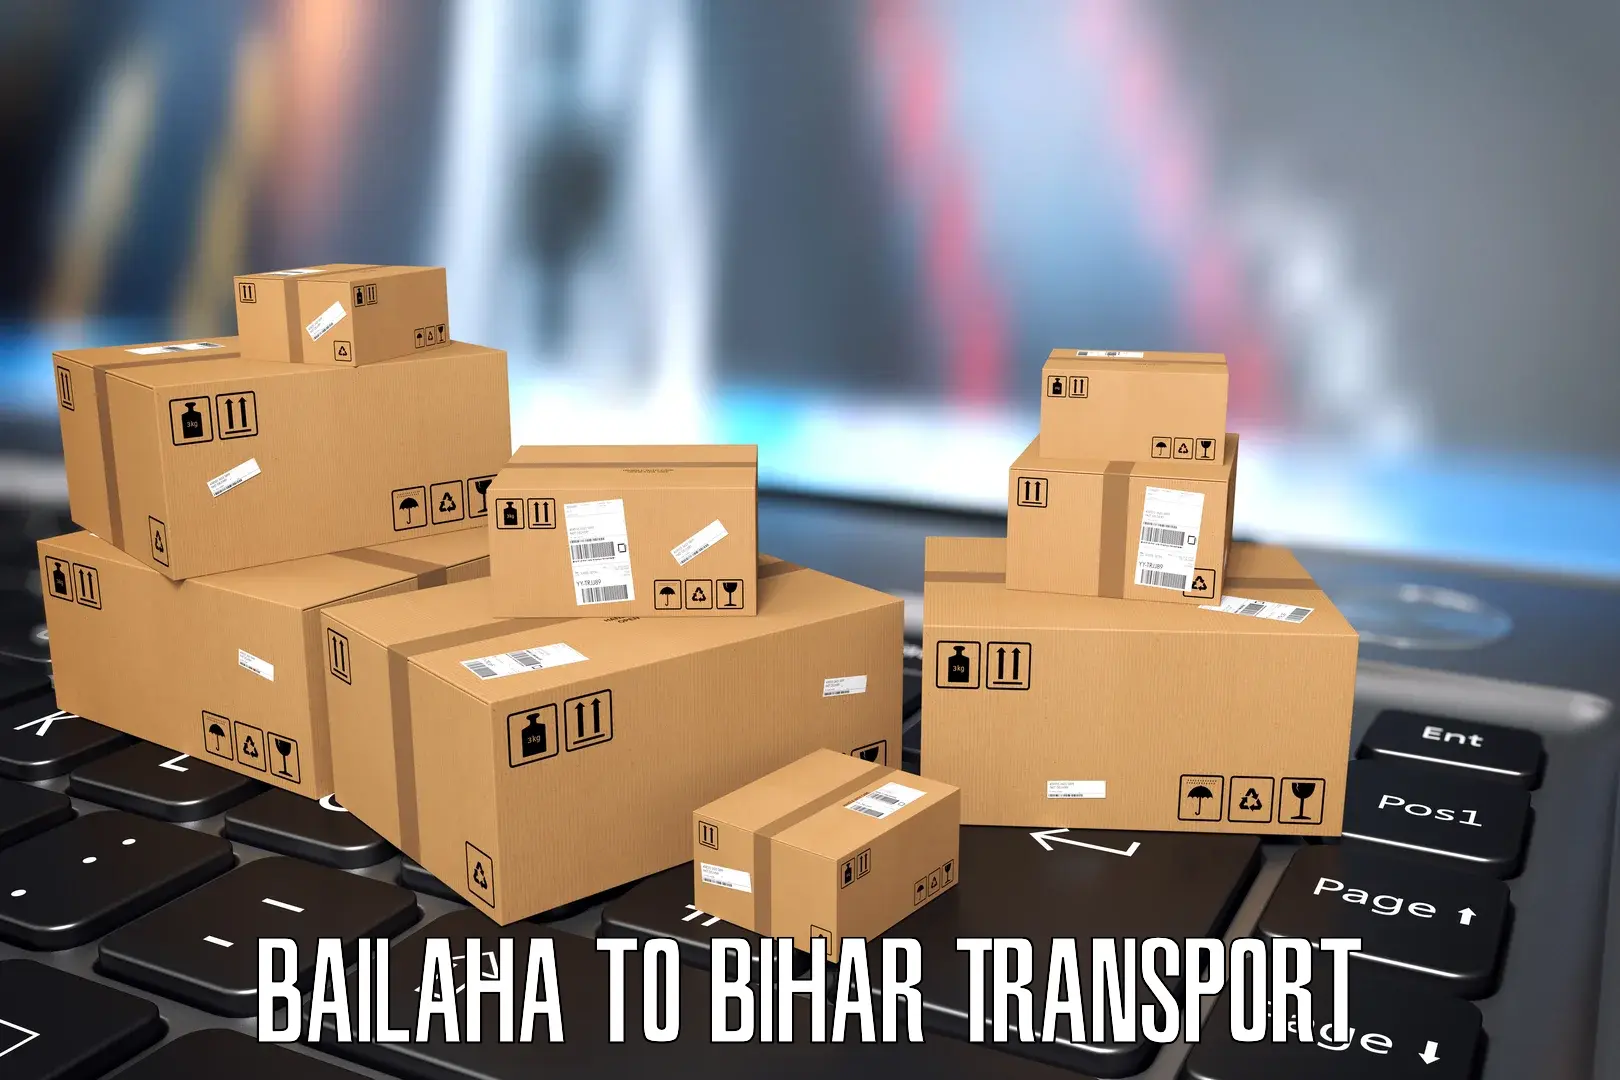 Domestic transport services Bailaha to Biraul